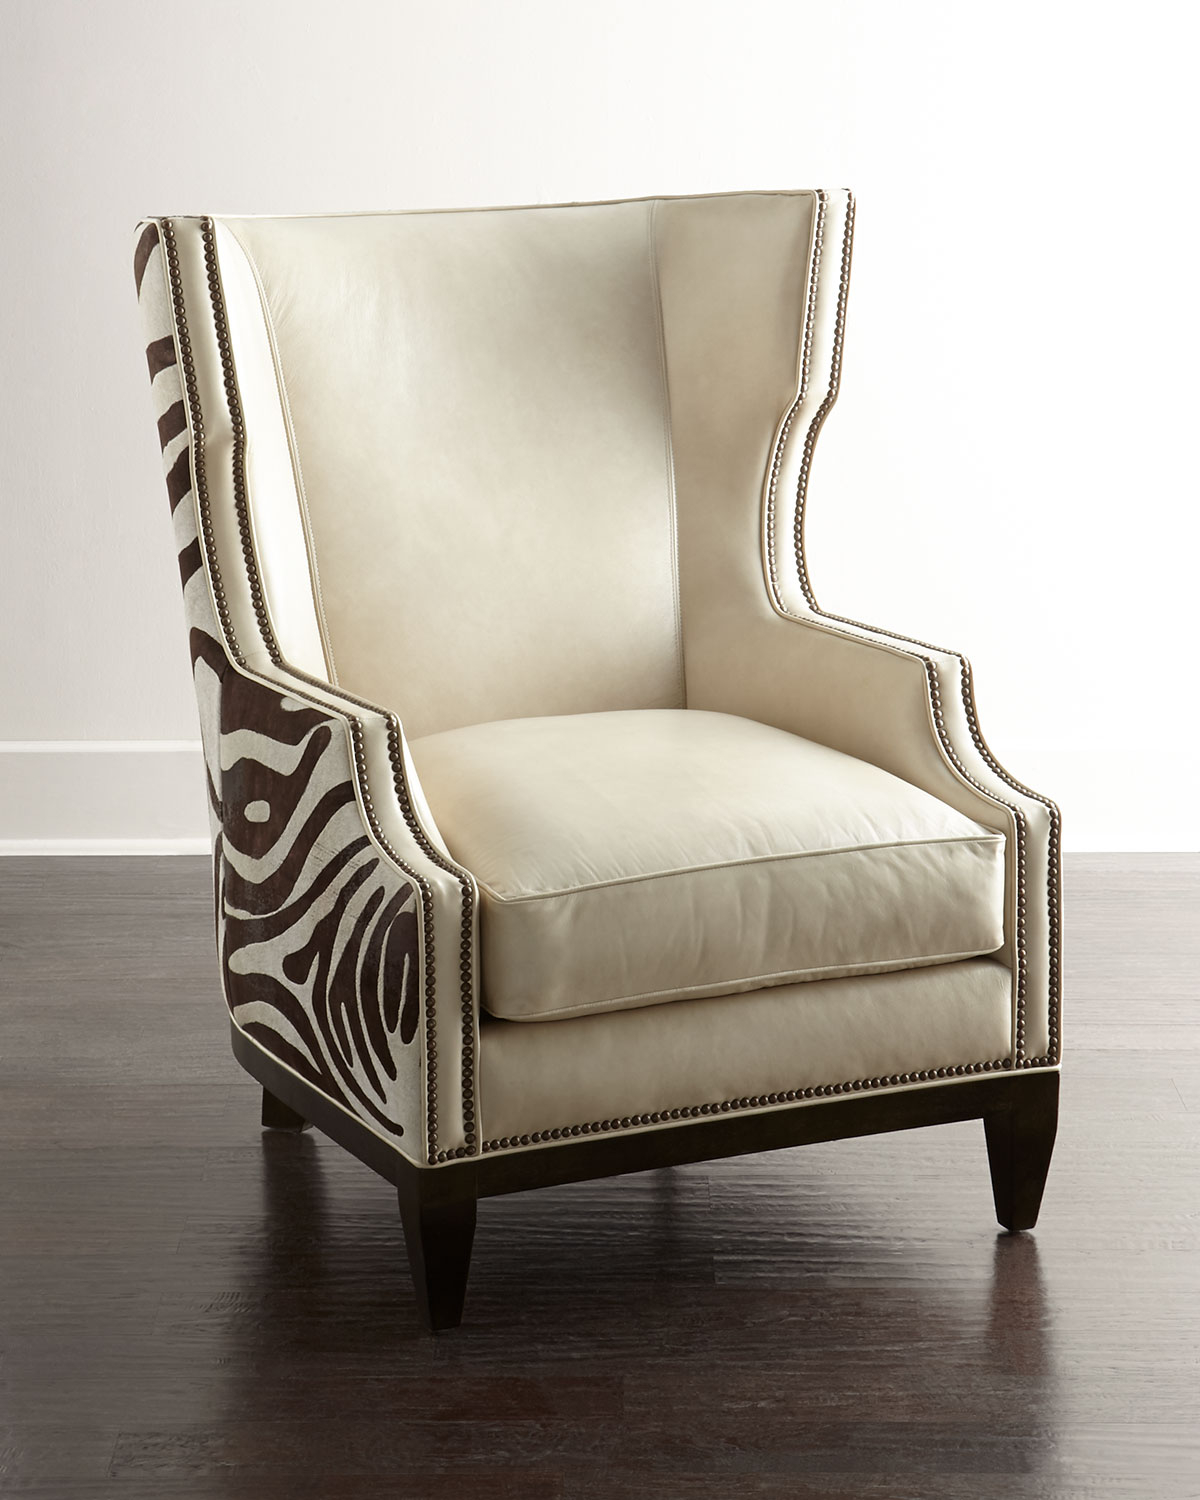 Massoud borra hairhide chair the perfect blend of simple and